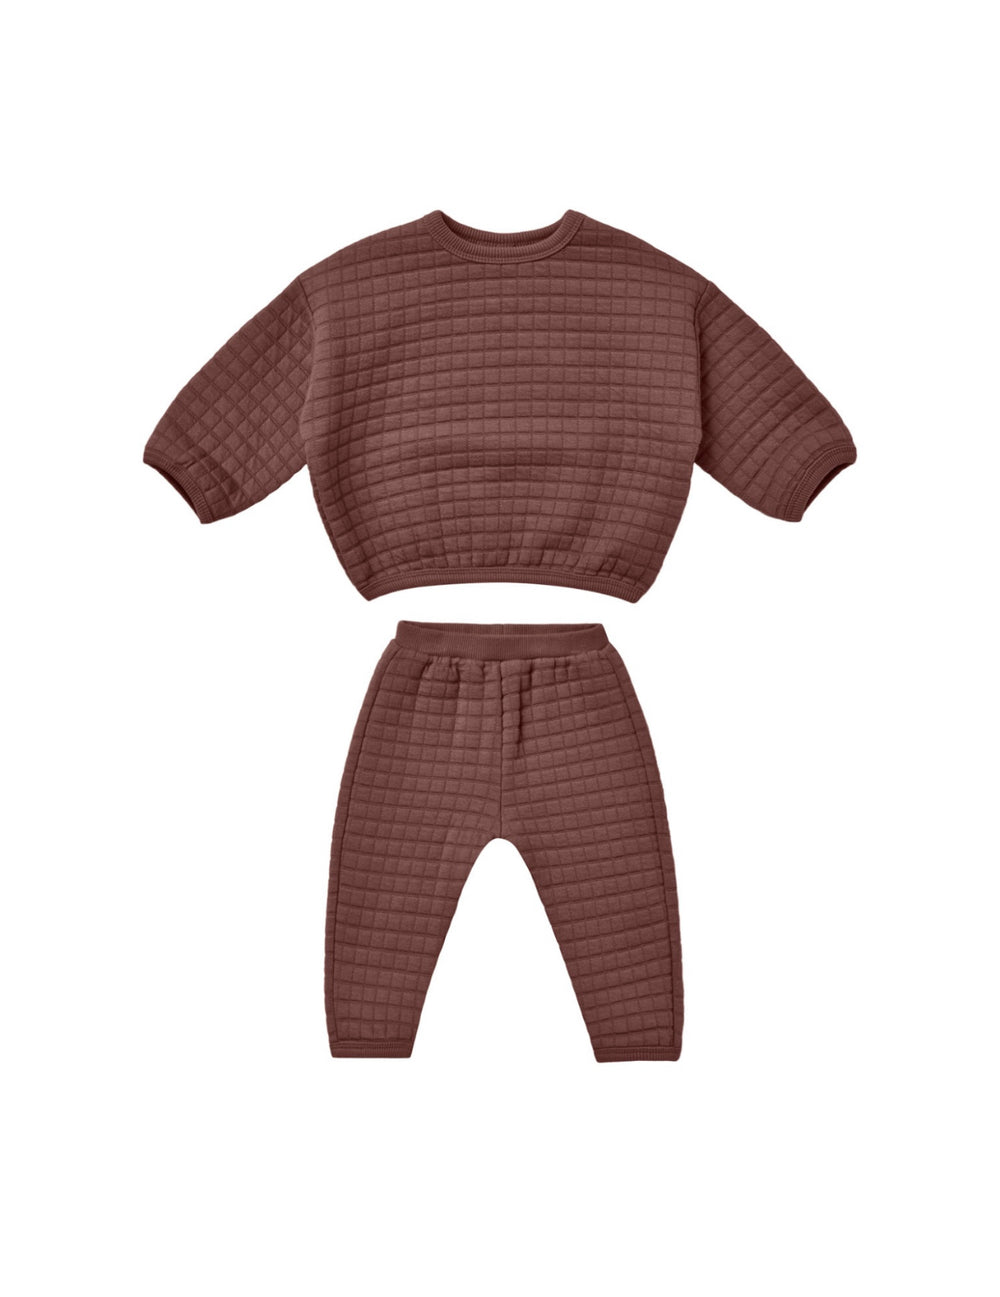 QUILTED SWEATER + PANT SET || PLUM